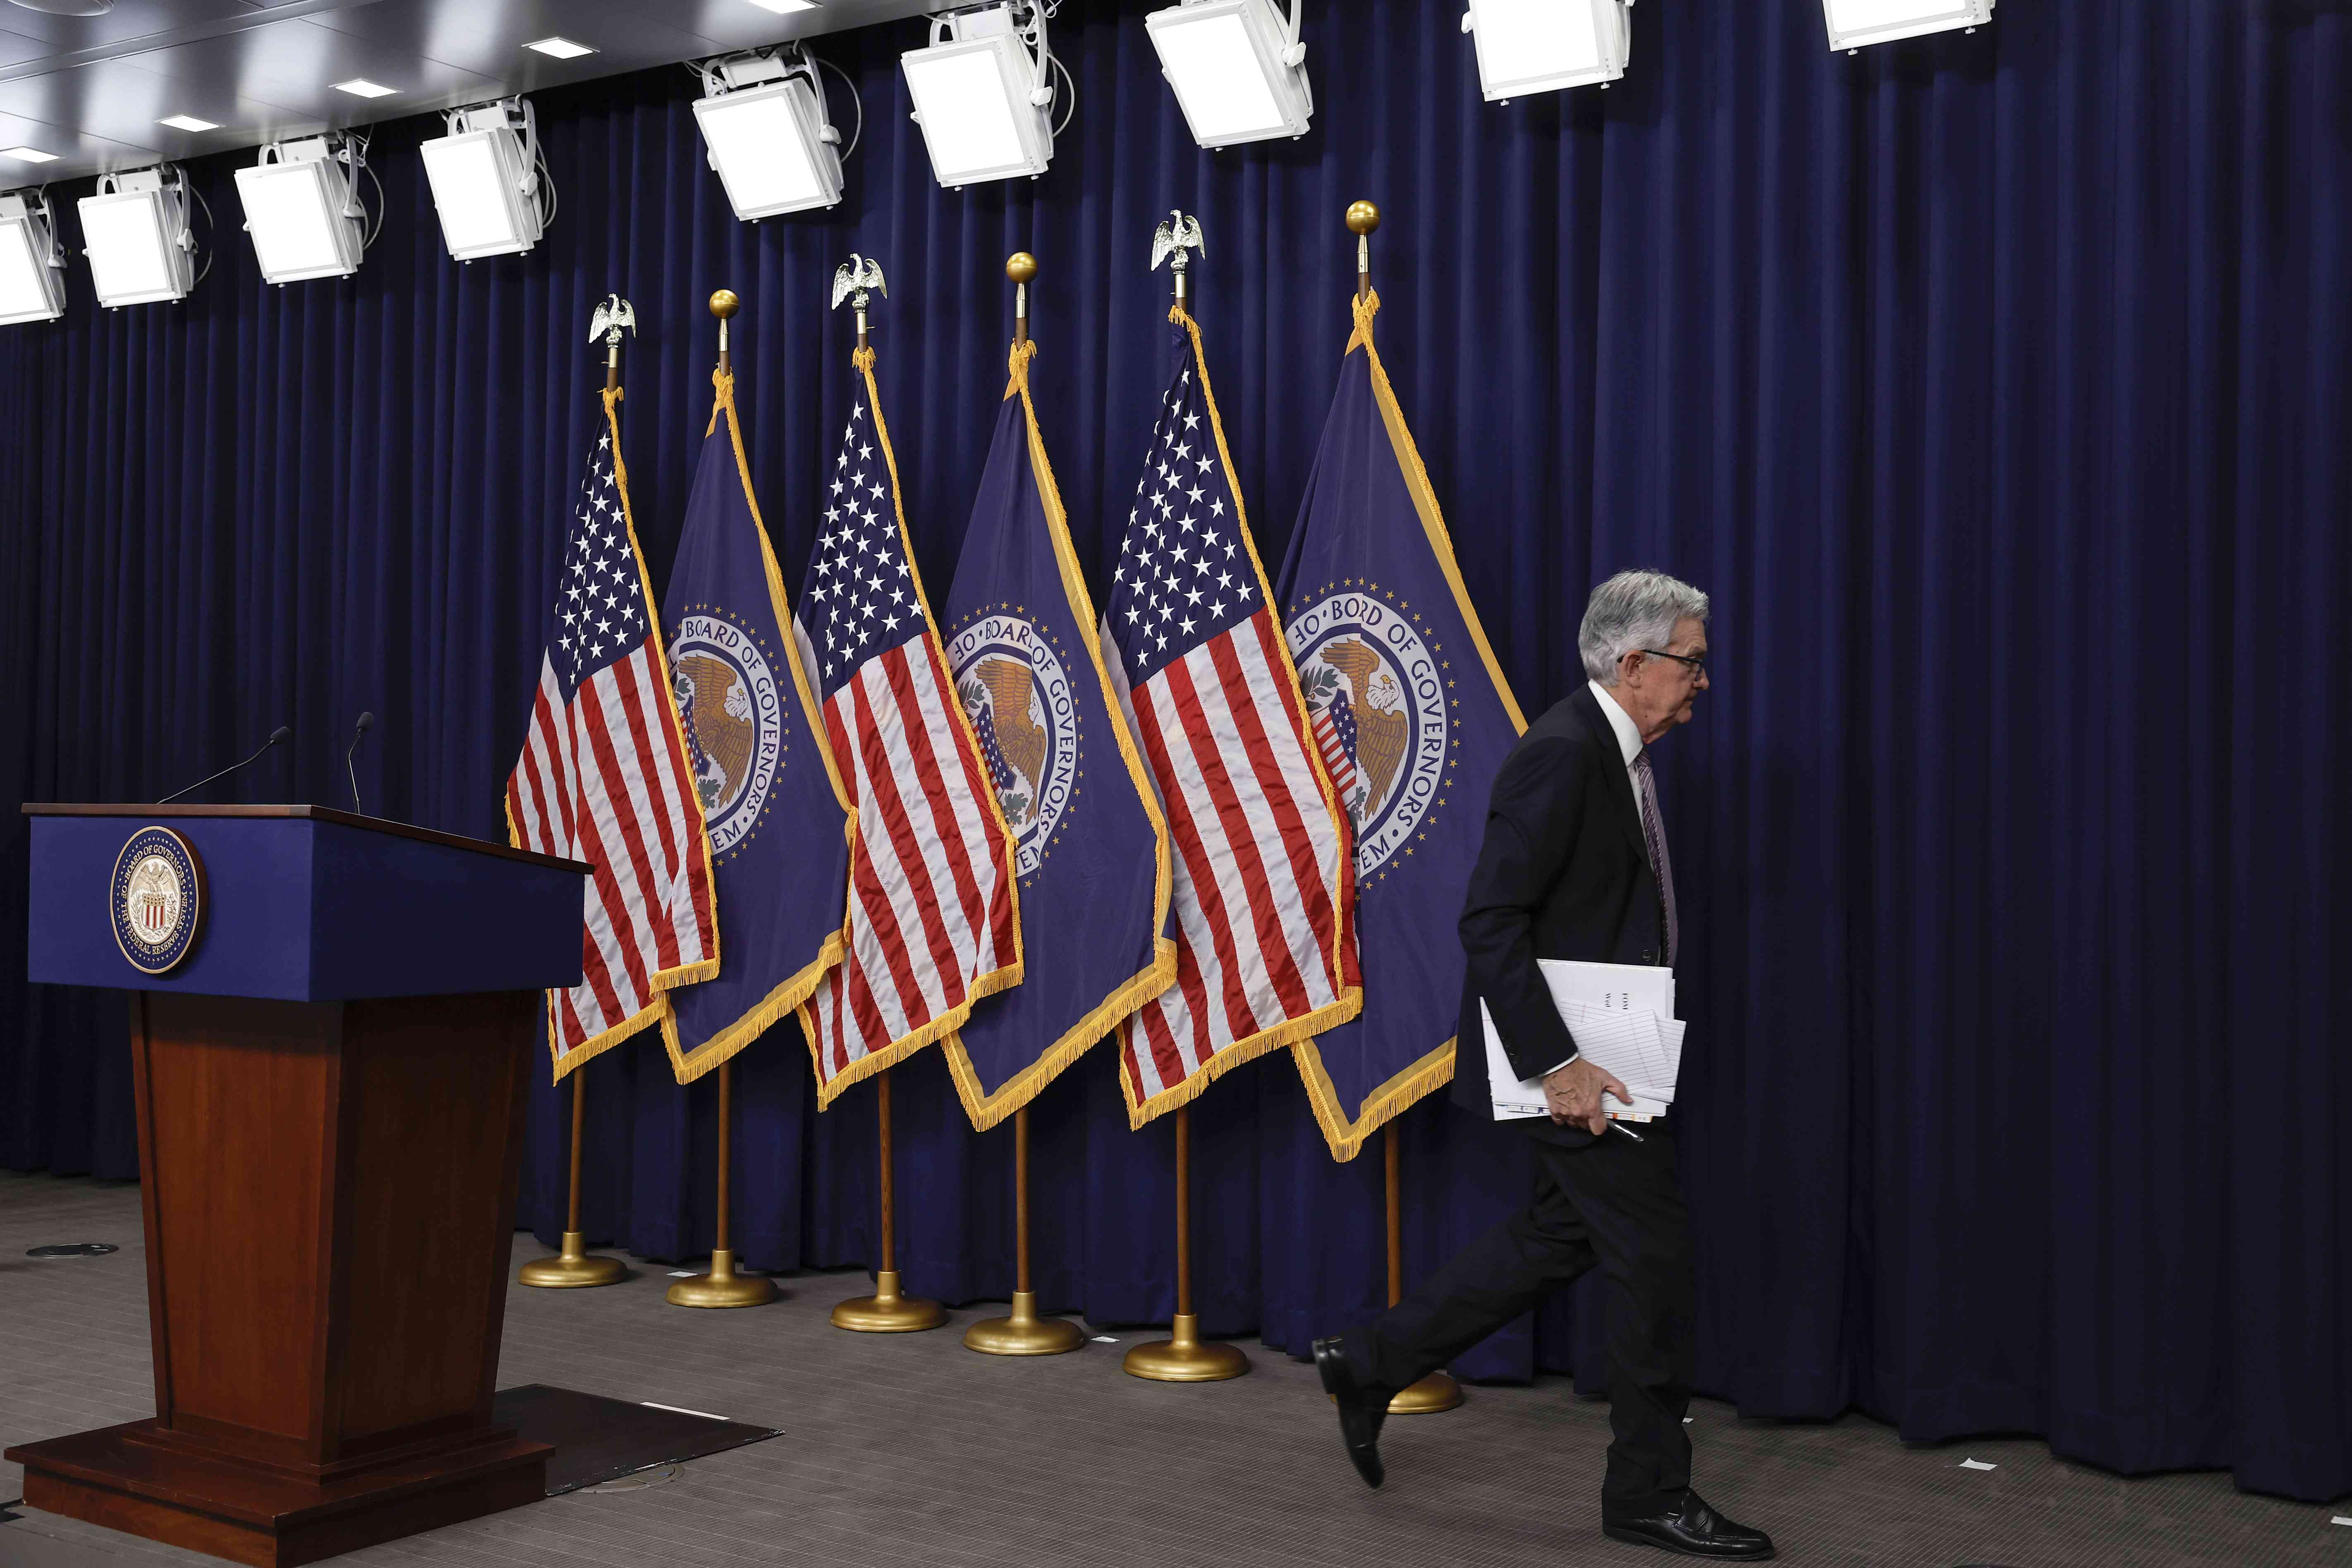 Federal Reserve Board Chairman Jerome Powell departs after giving remarks at a news conference following a Federal Open Market Committee meeting on May 3, 2023 in Washington, D.C.